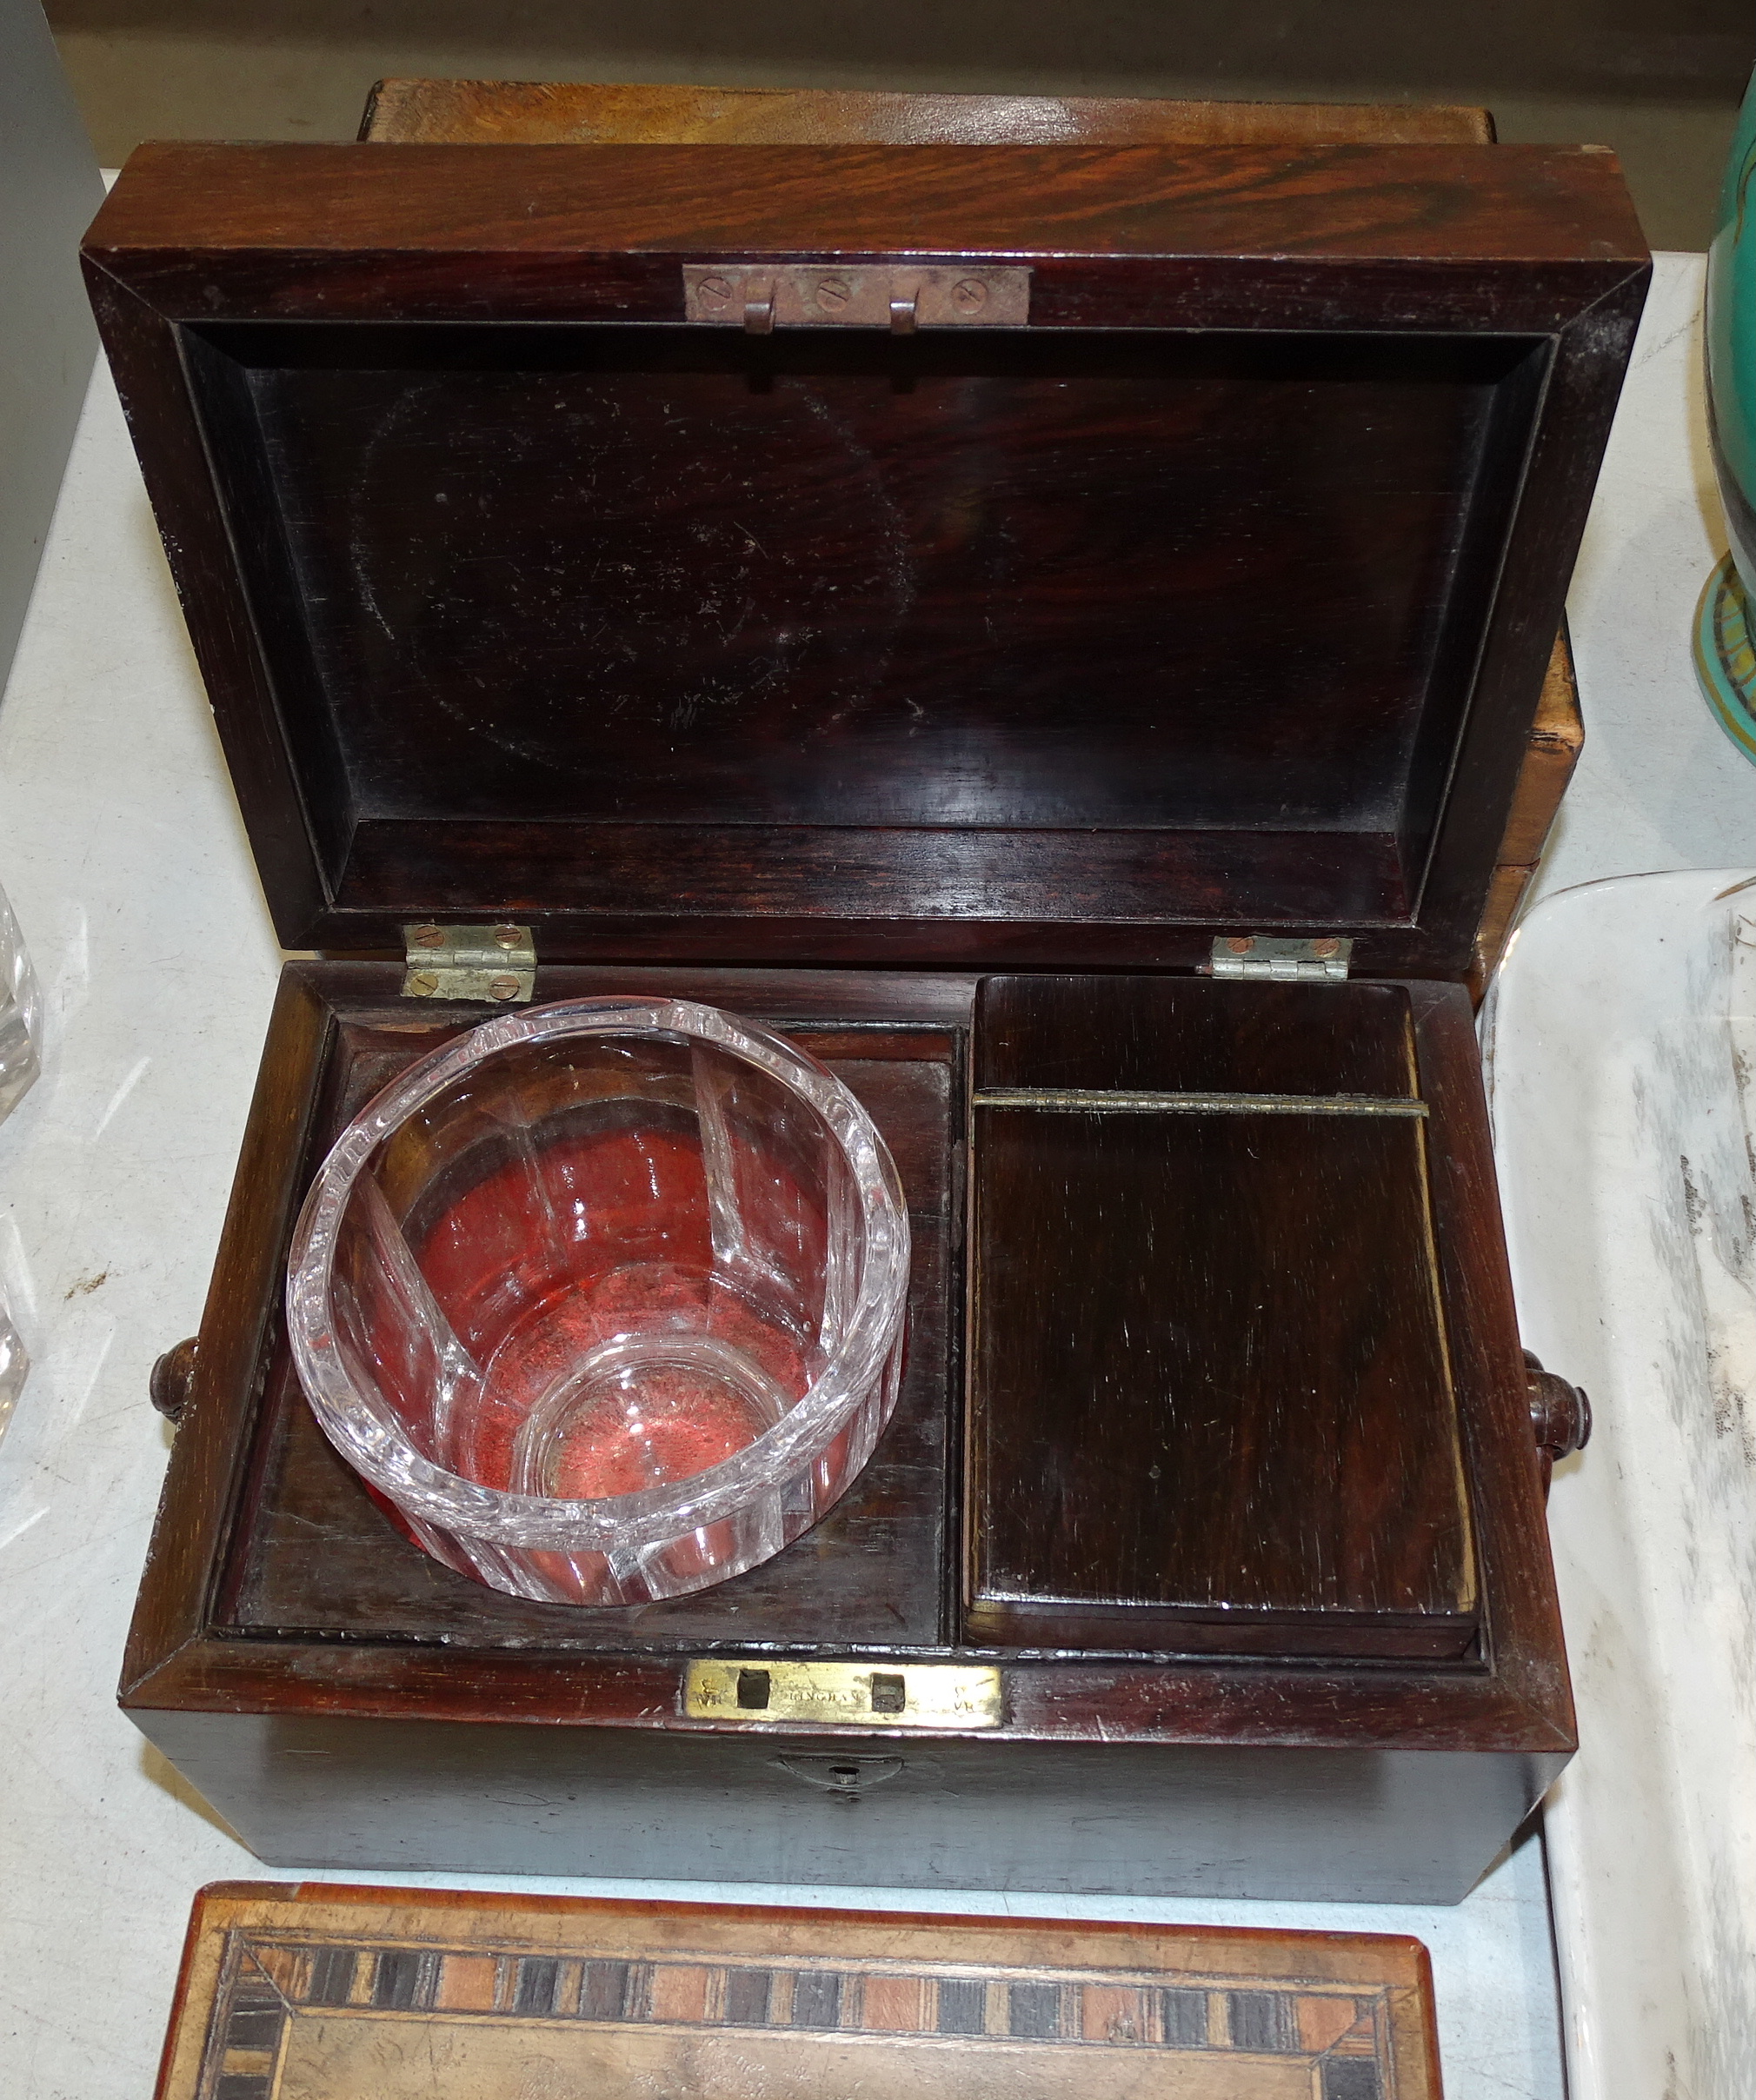 A 19th century rosewood tea caddy with interior cannister and glass mixing bowl, fitted with ring